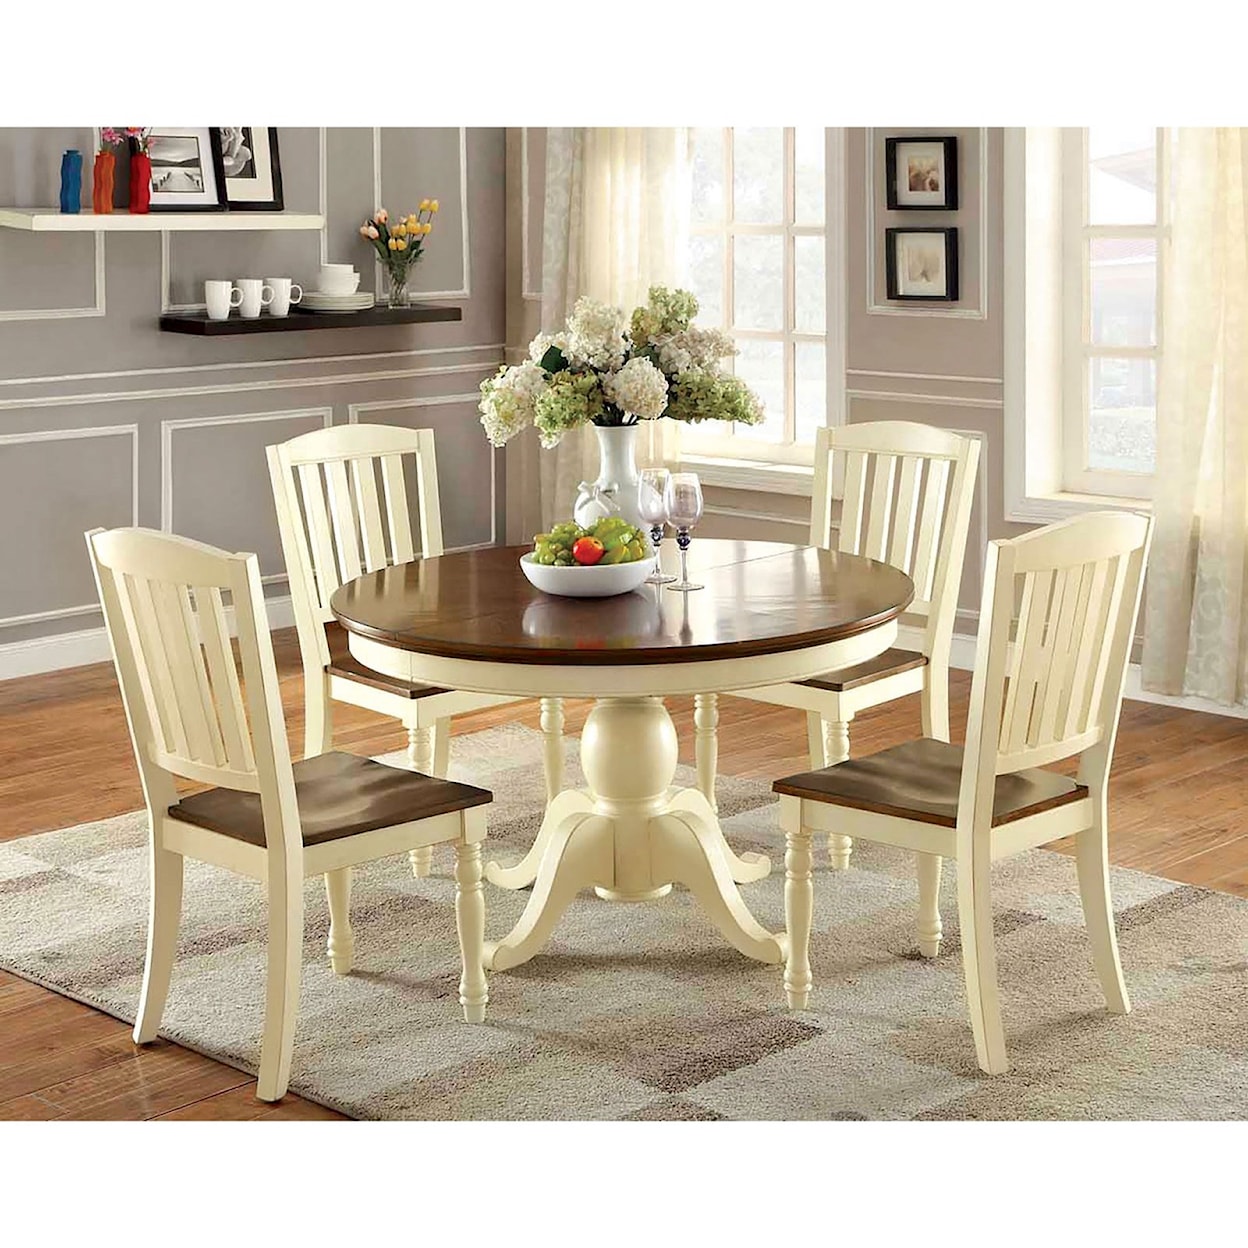 Furniture of America Harrisburg Oval Dining Table 